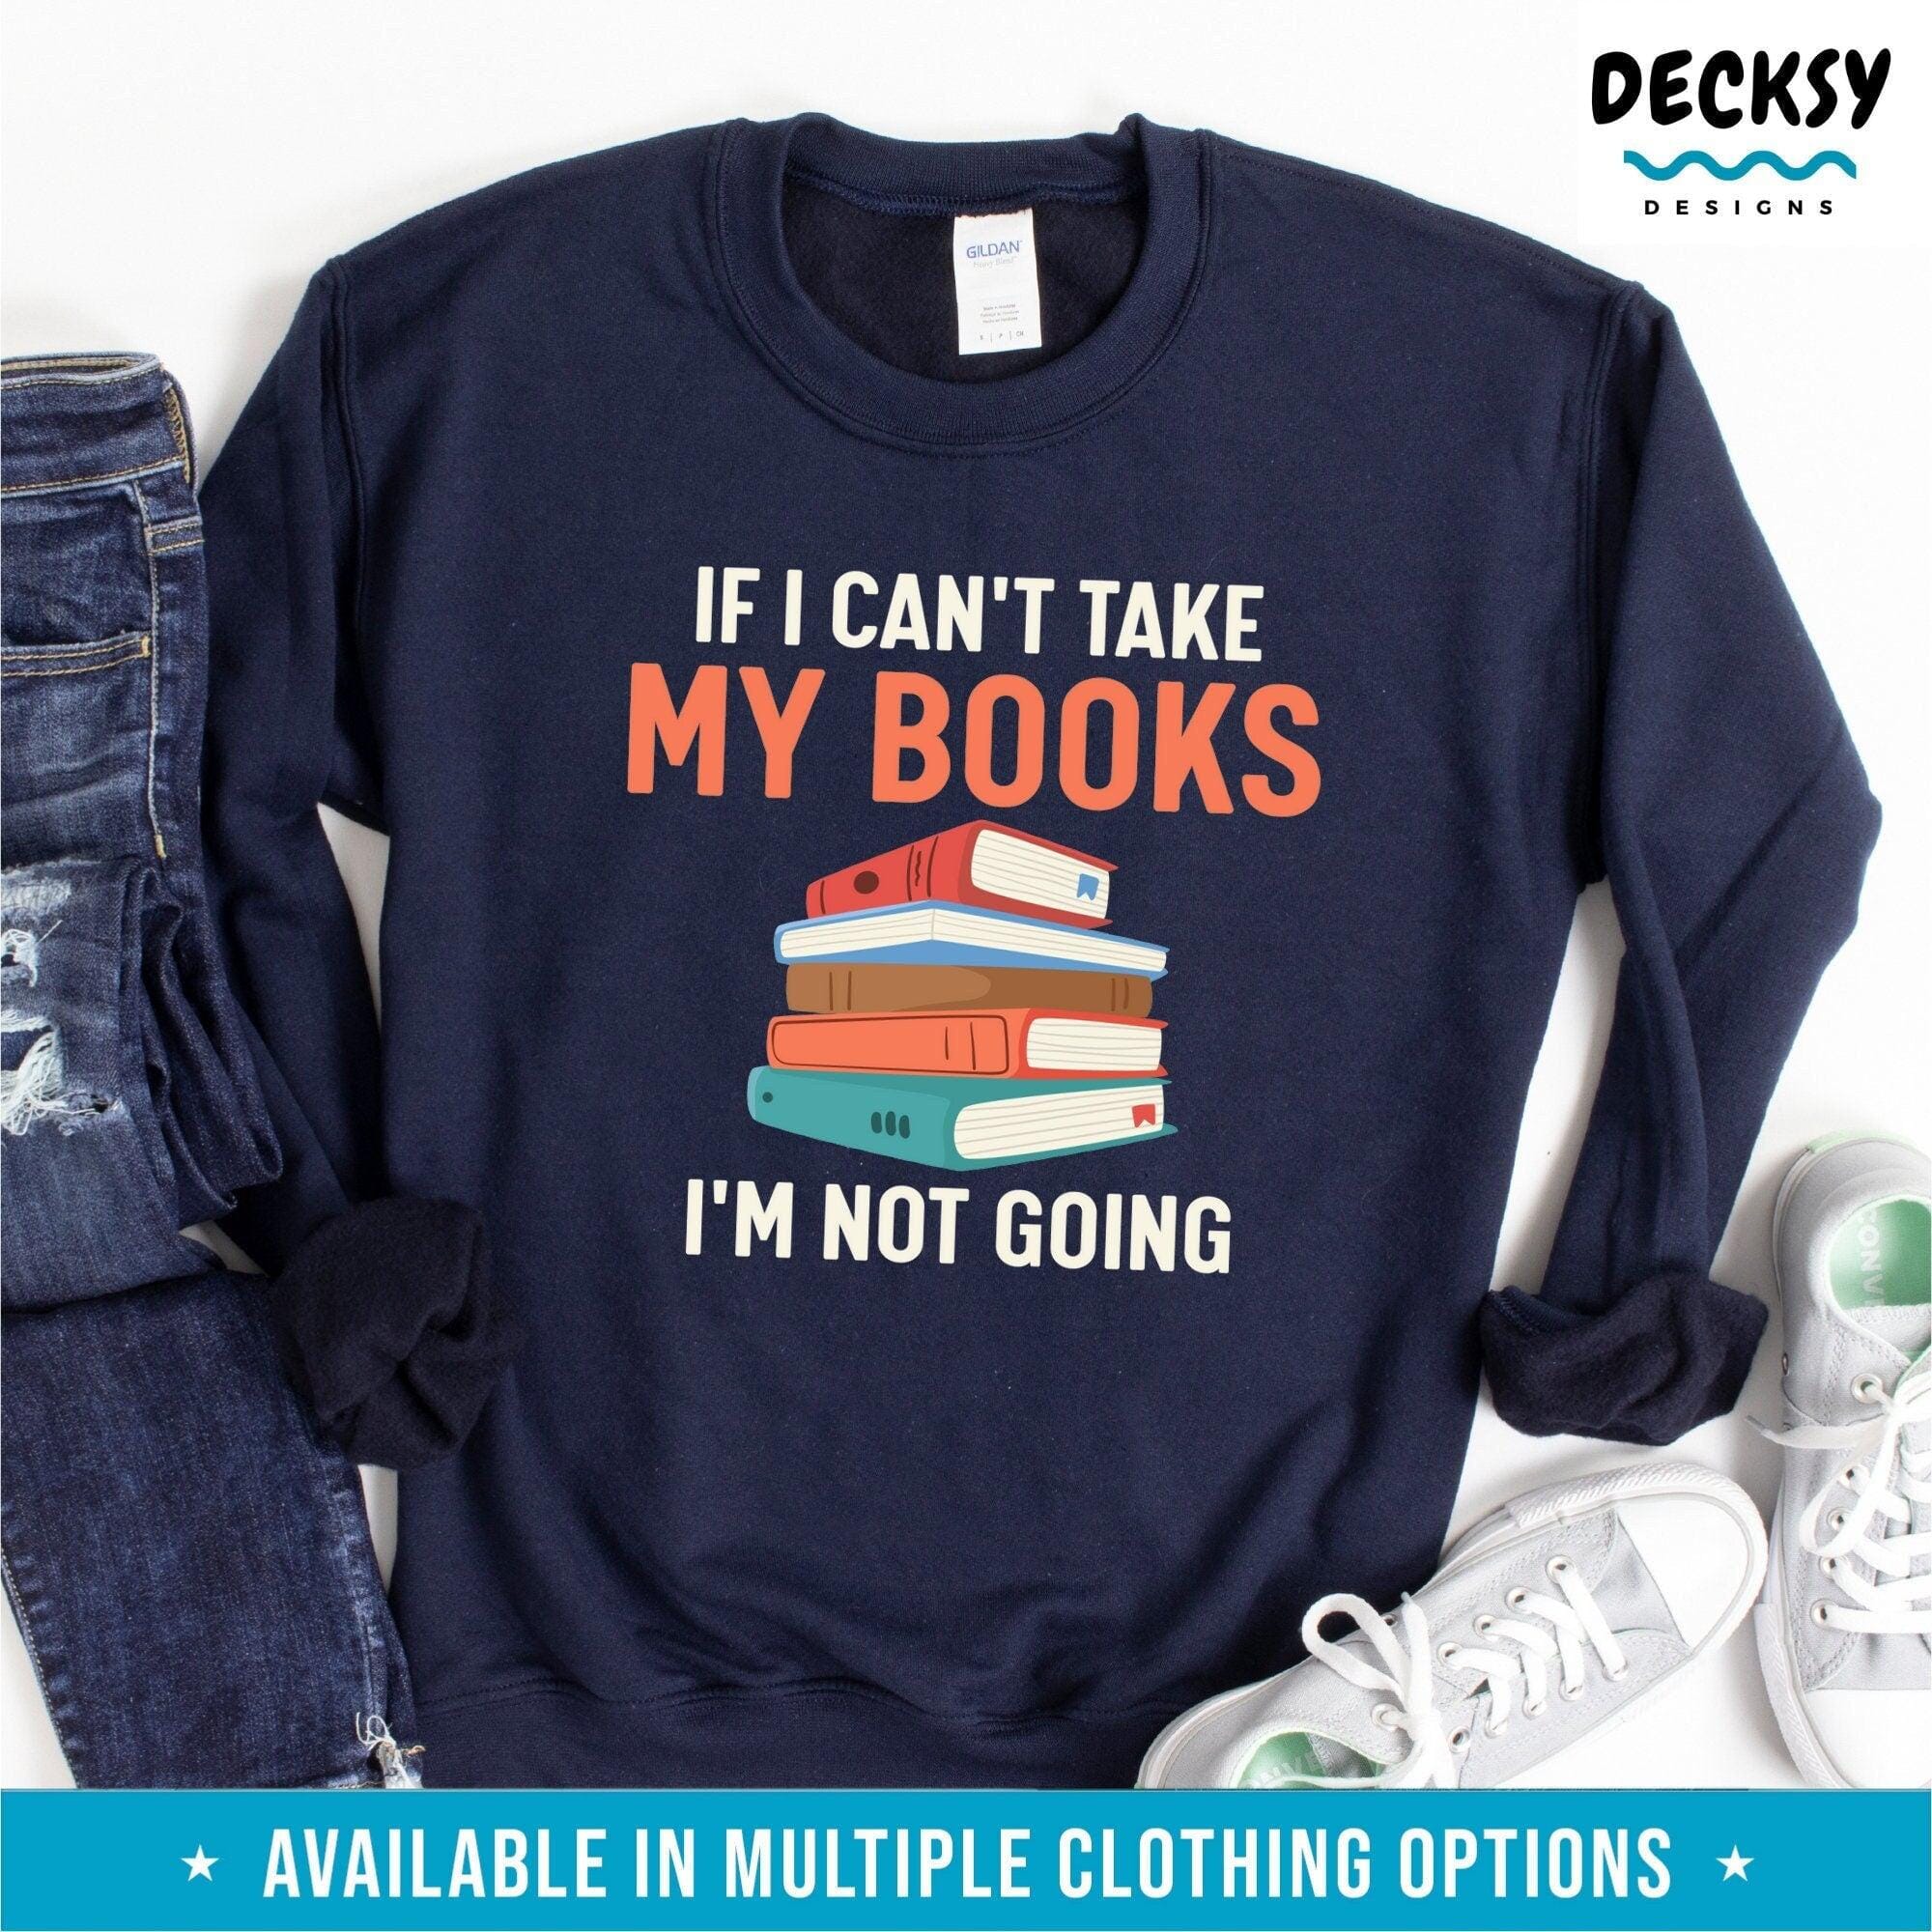 Book Lover Shirt, Gift For Reader-Clothing:Gender-Neutral Adult Clothing:Tops & Tees:T-shirts:Graphic Tees-DecksyDesigns